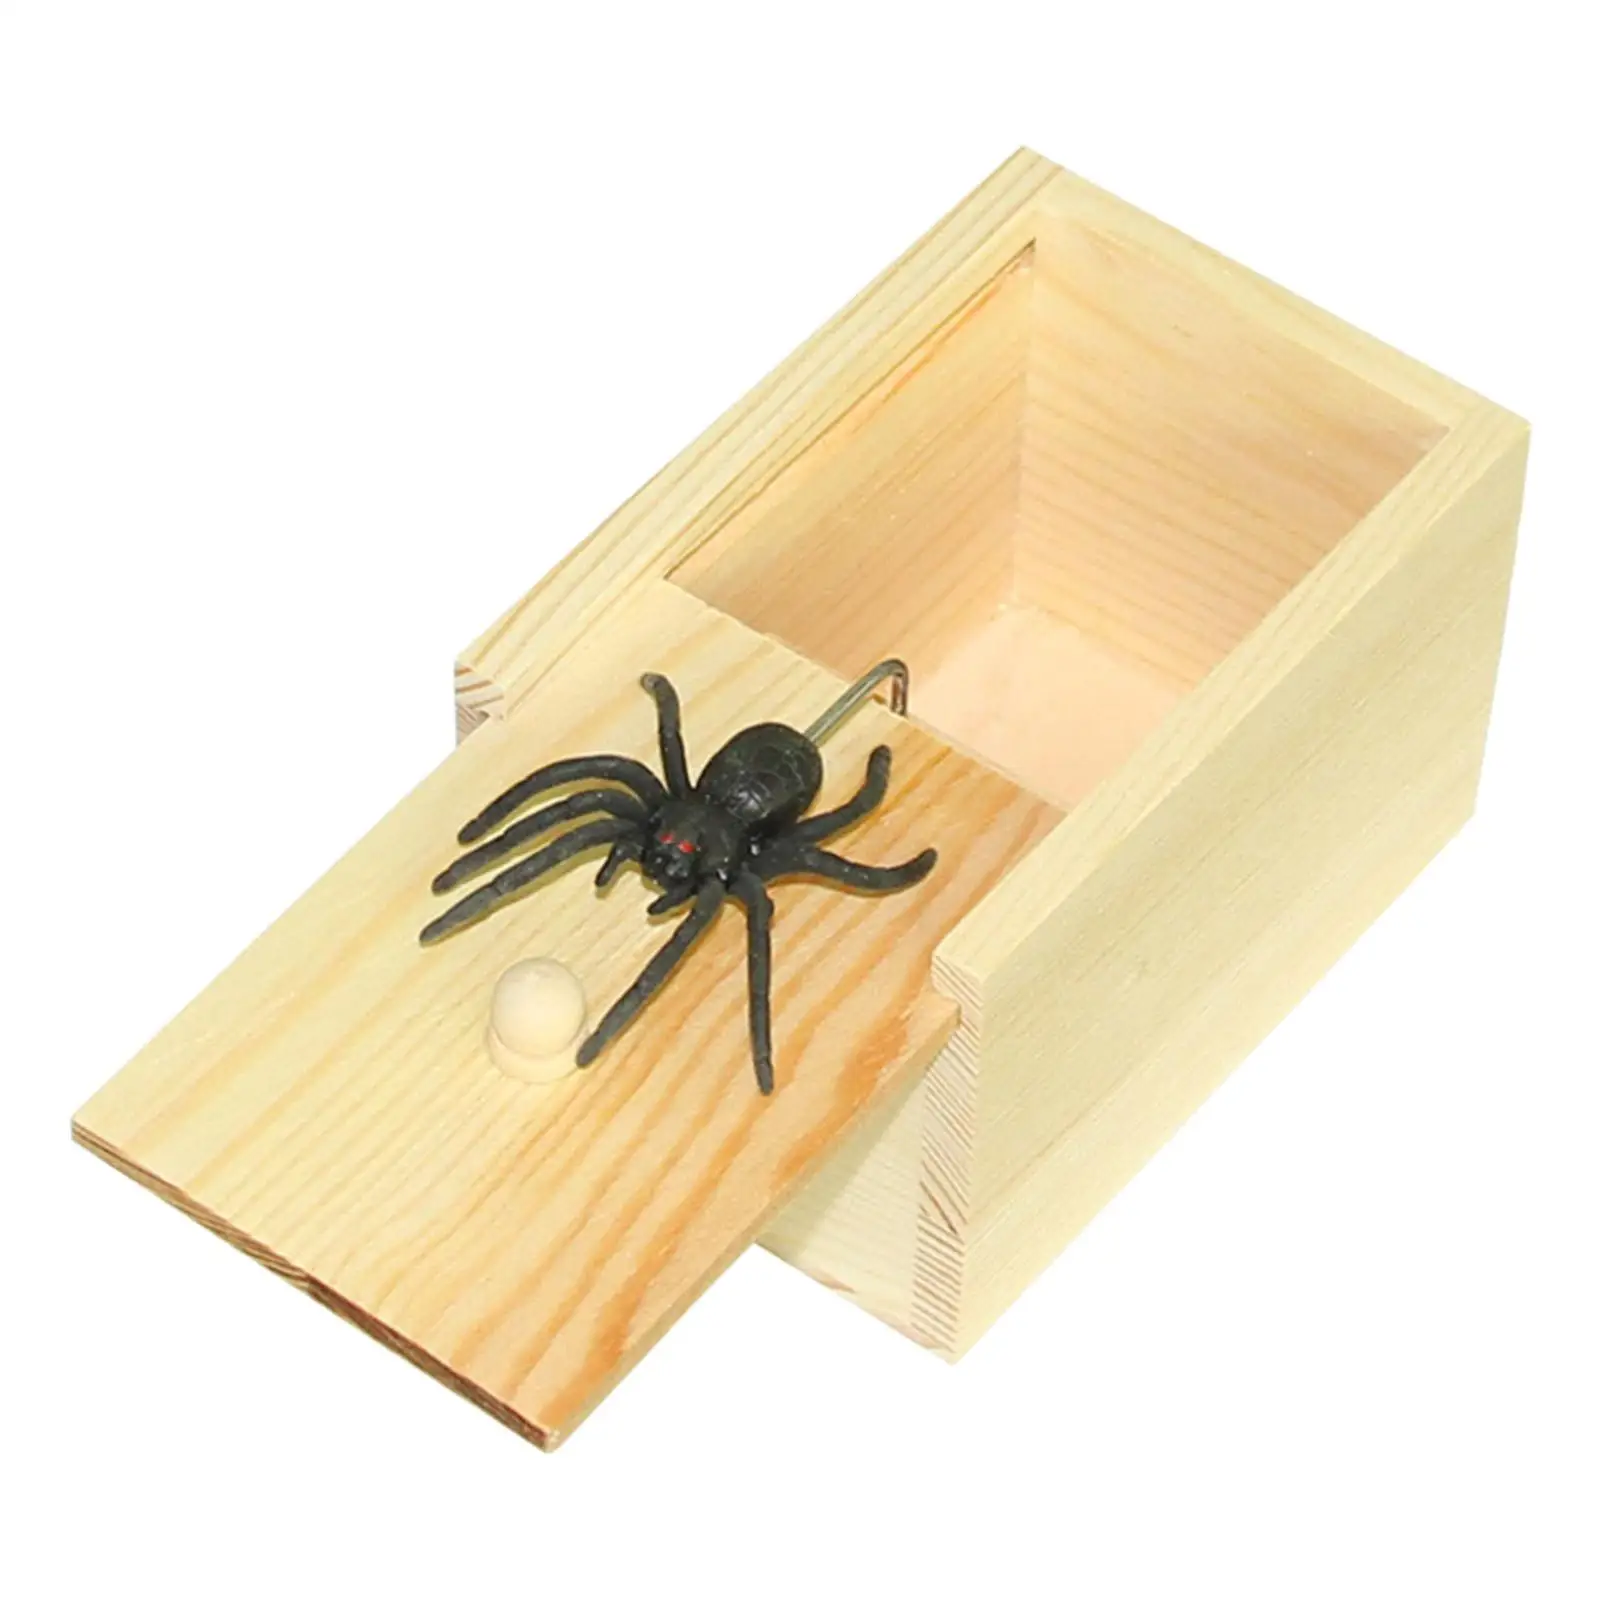 Handmade Fun Practical Joke Boxes Spider Scare Box for Halloween Gifts